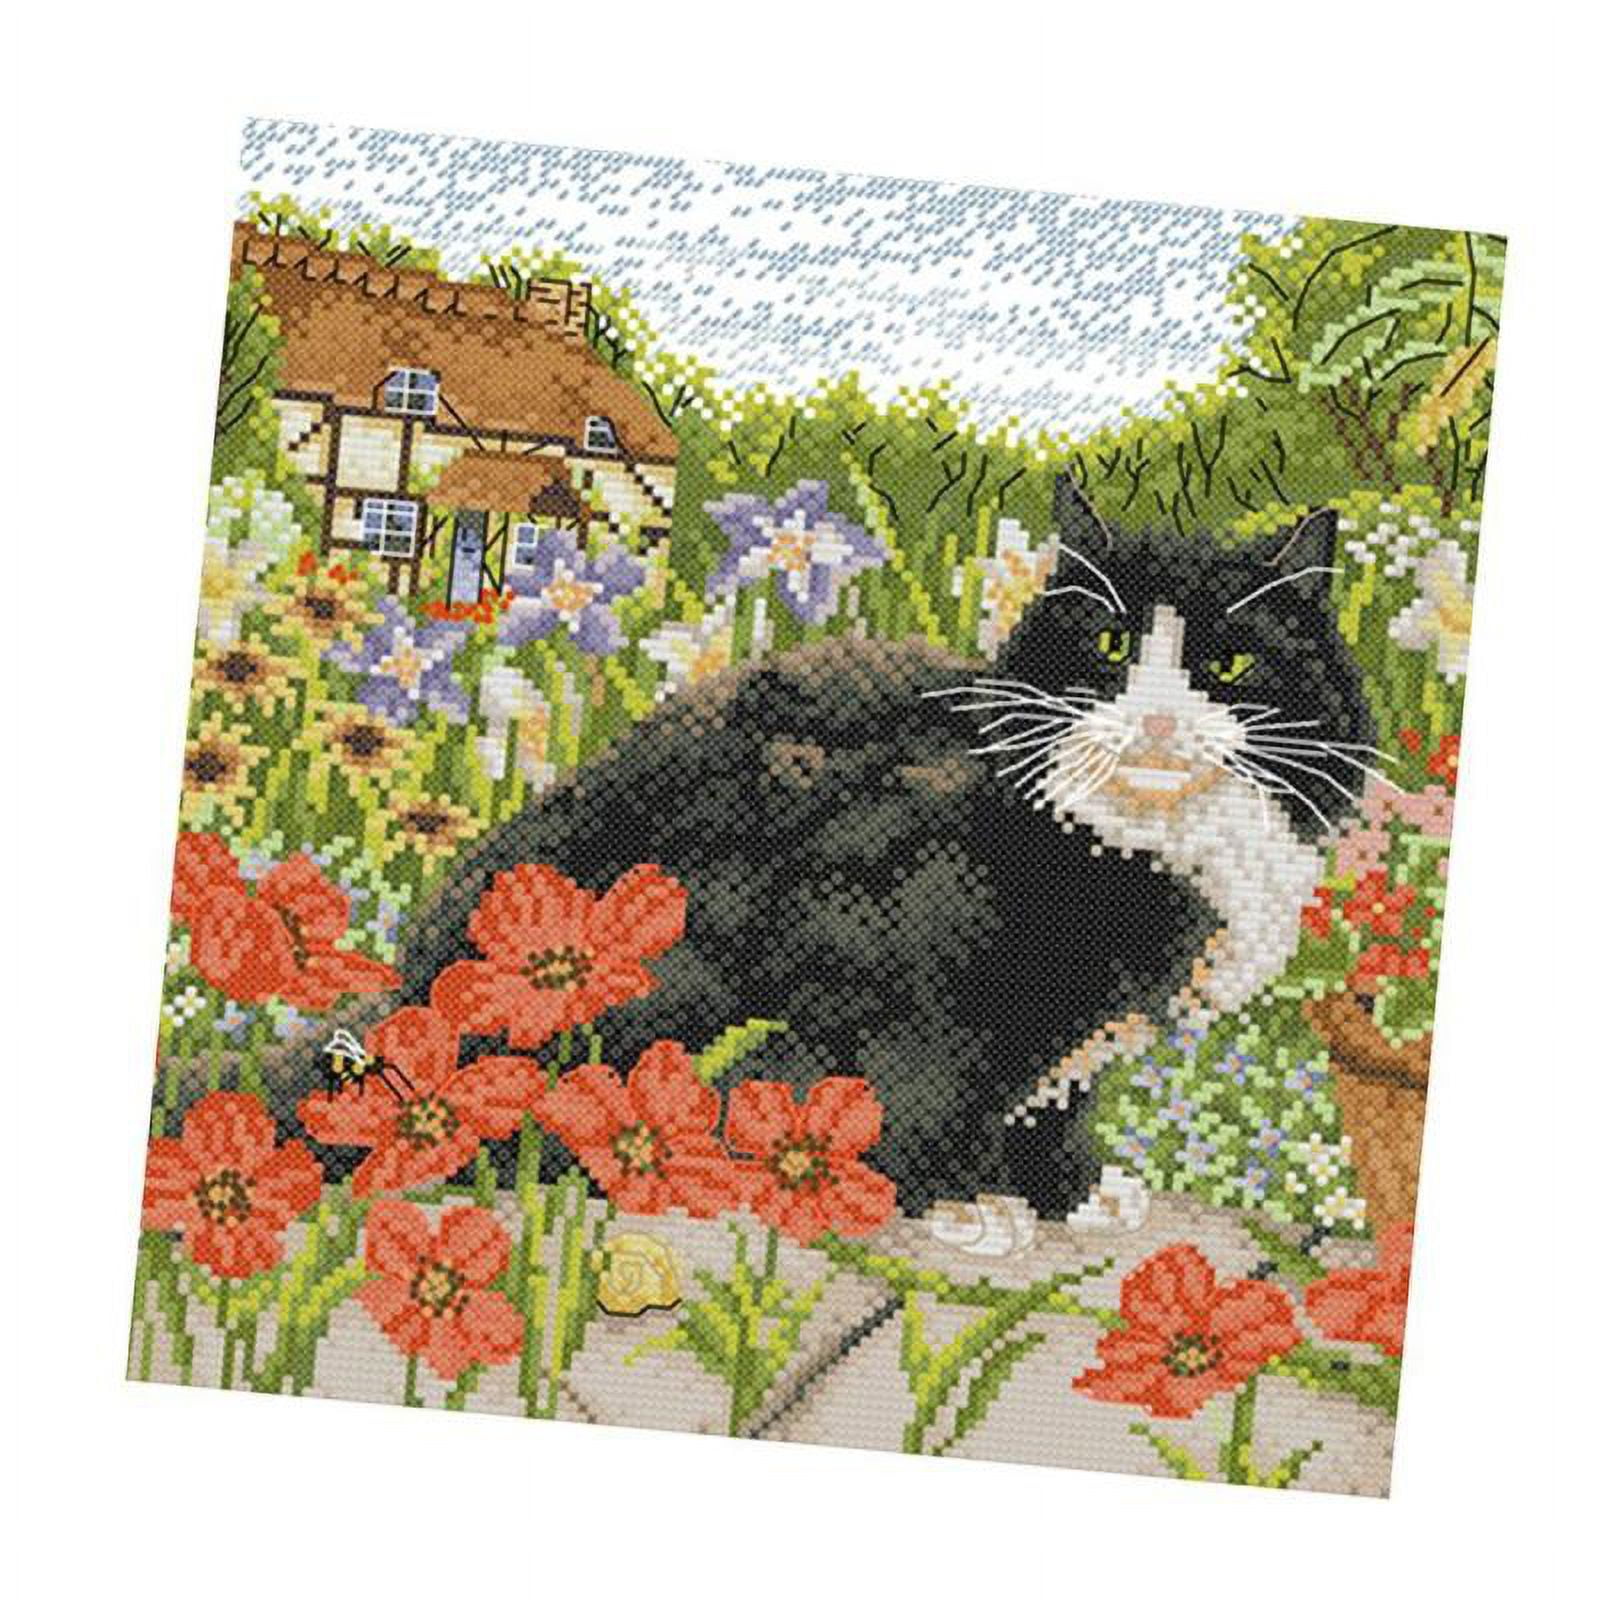 Kids Craft Floral Cat Cross Stitch Kit Embroidery Handwork Home Decoration  - 14CT